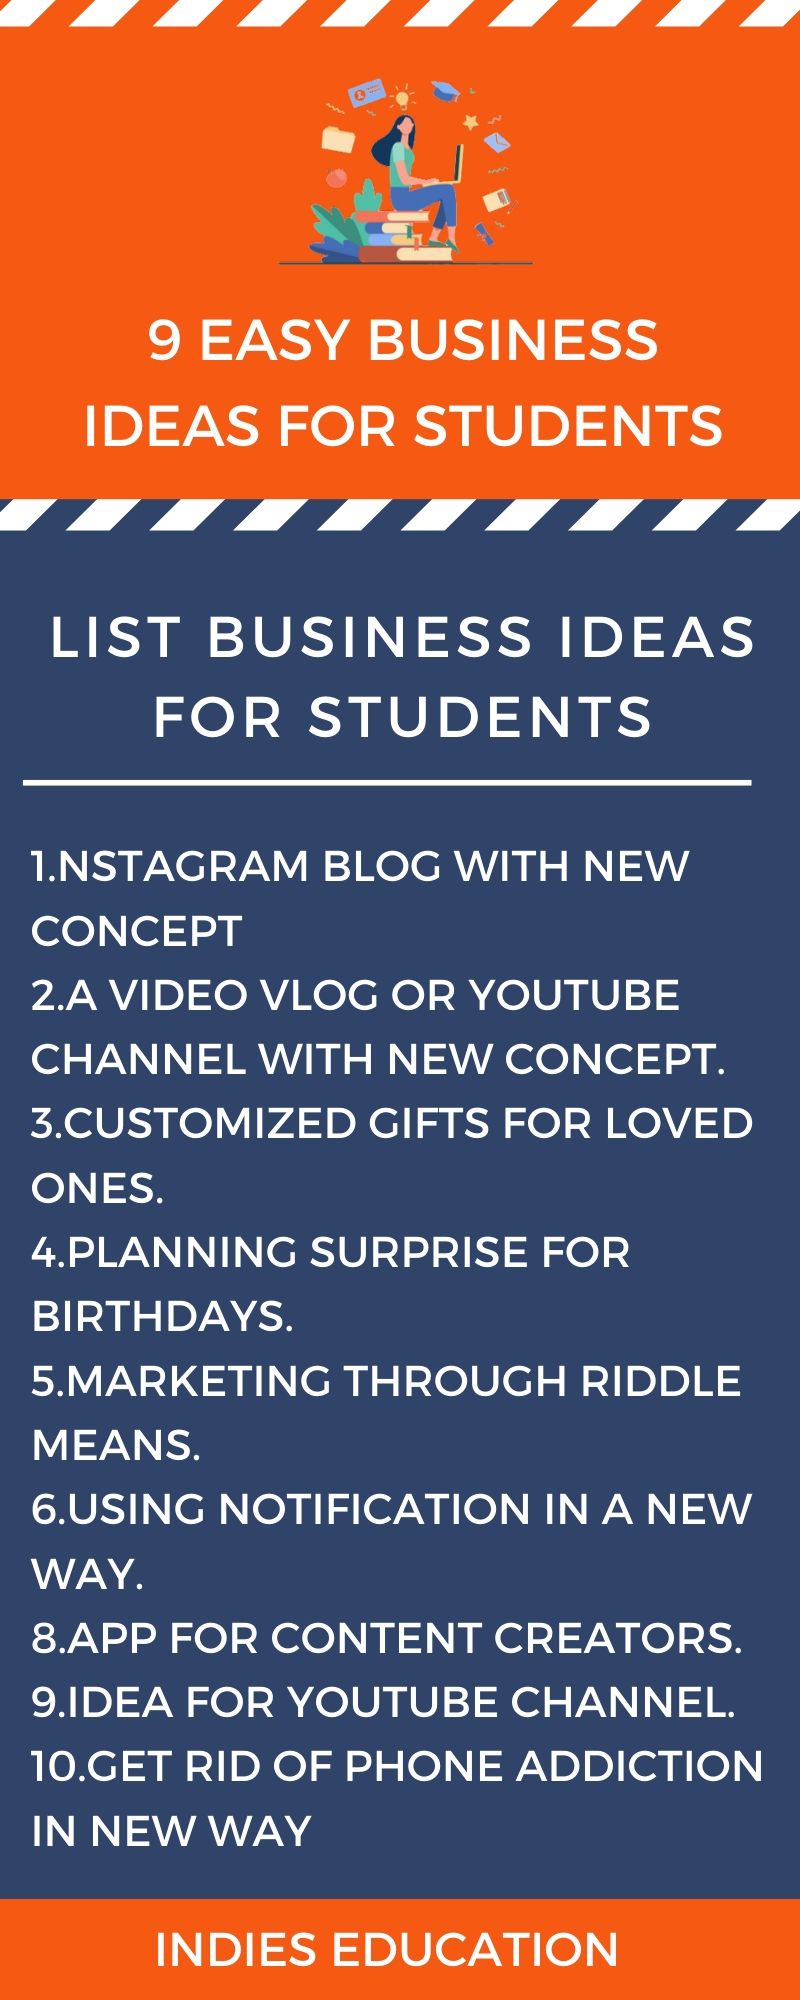 business ideas for students with low investment, business ideas for students without investment, business ideas for students in India, part-time business ideas for students, business ideas for highschool students, side business for students, business ideas entrepreneurs, business plan ideas list,